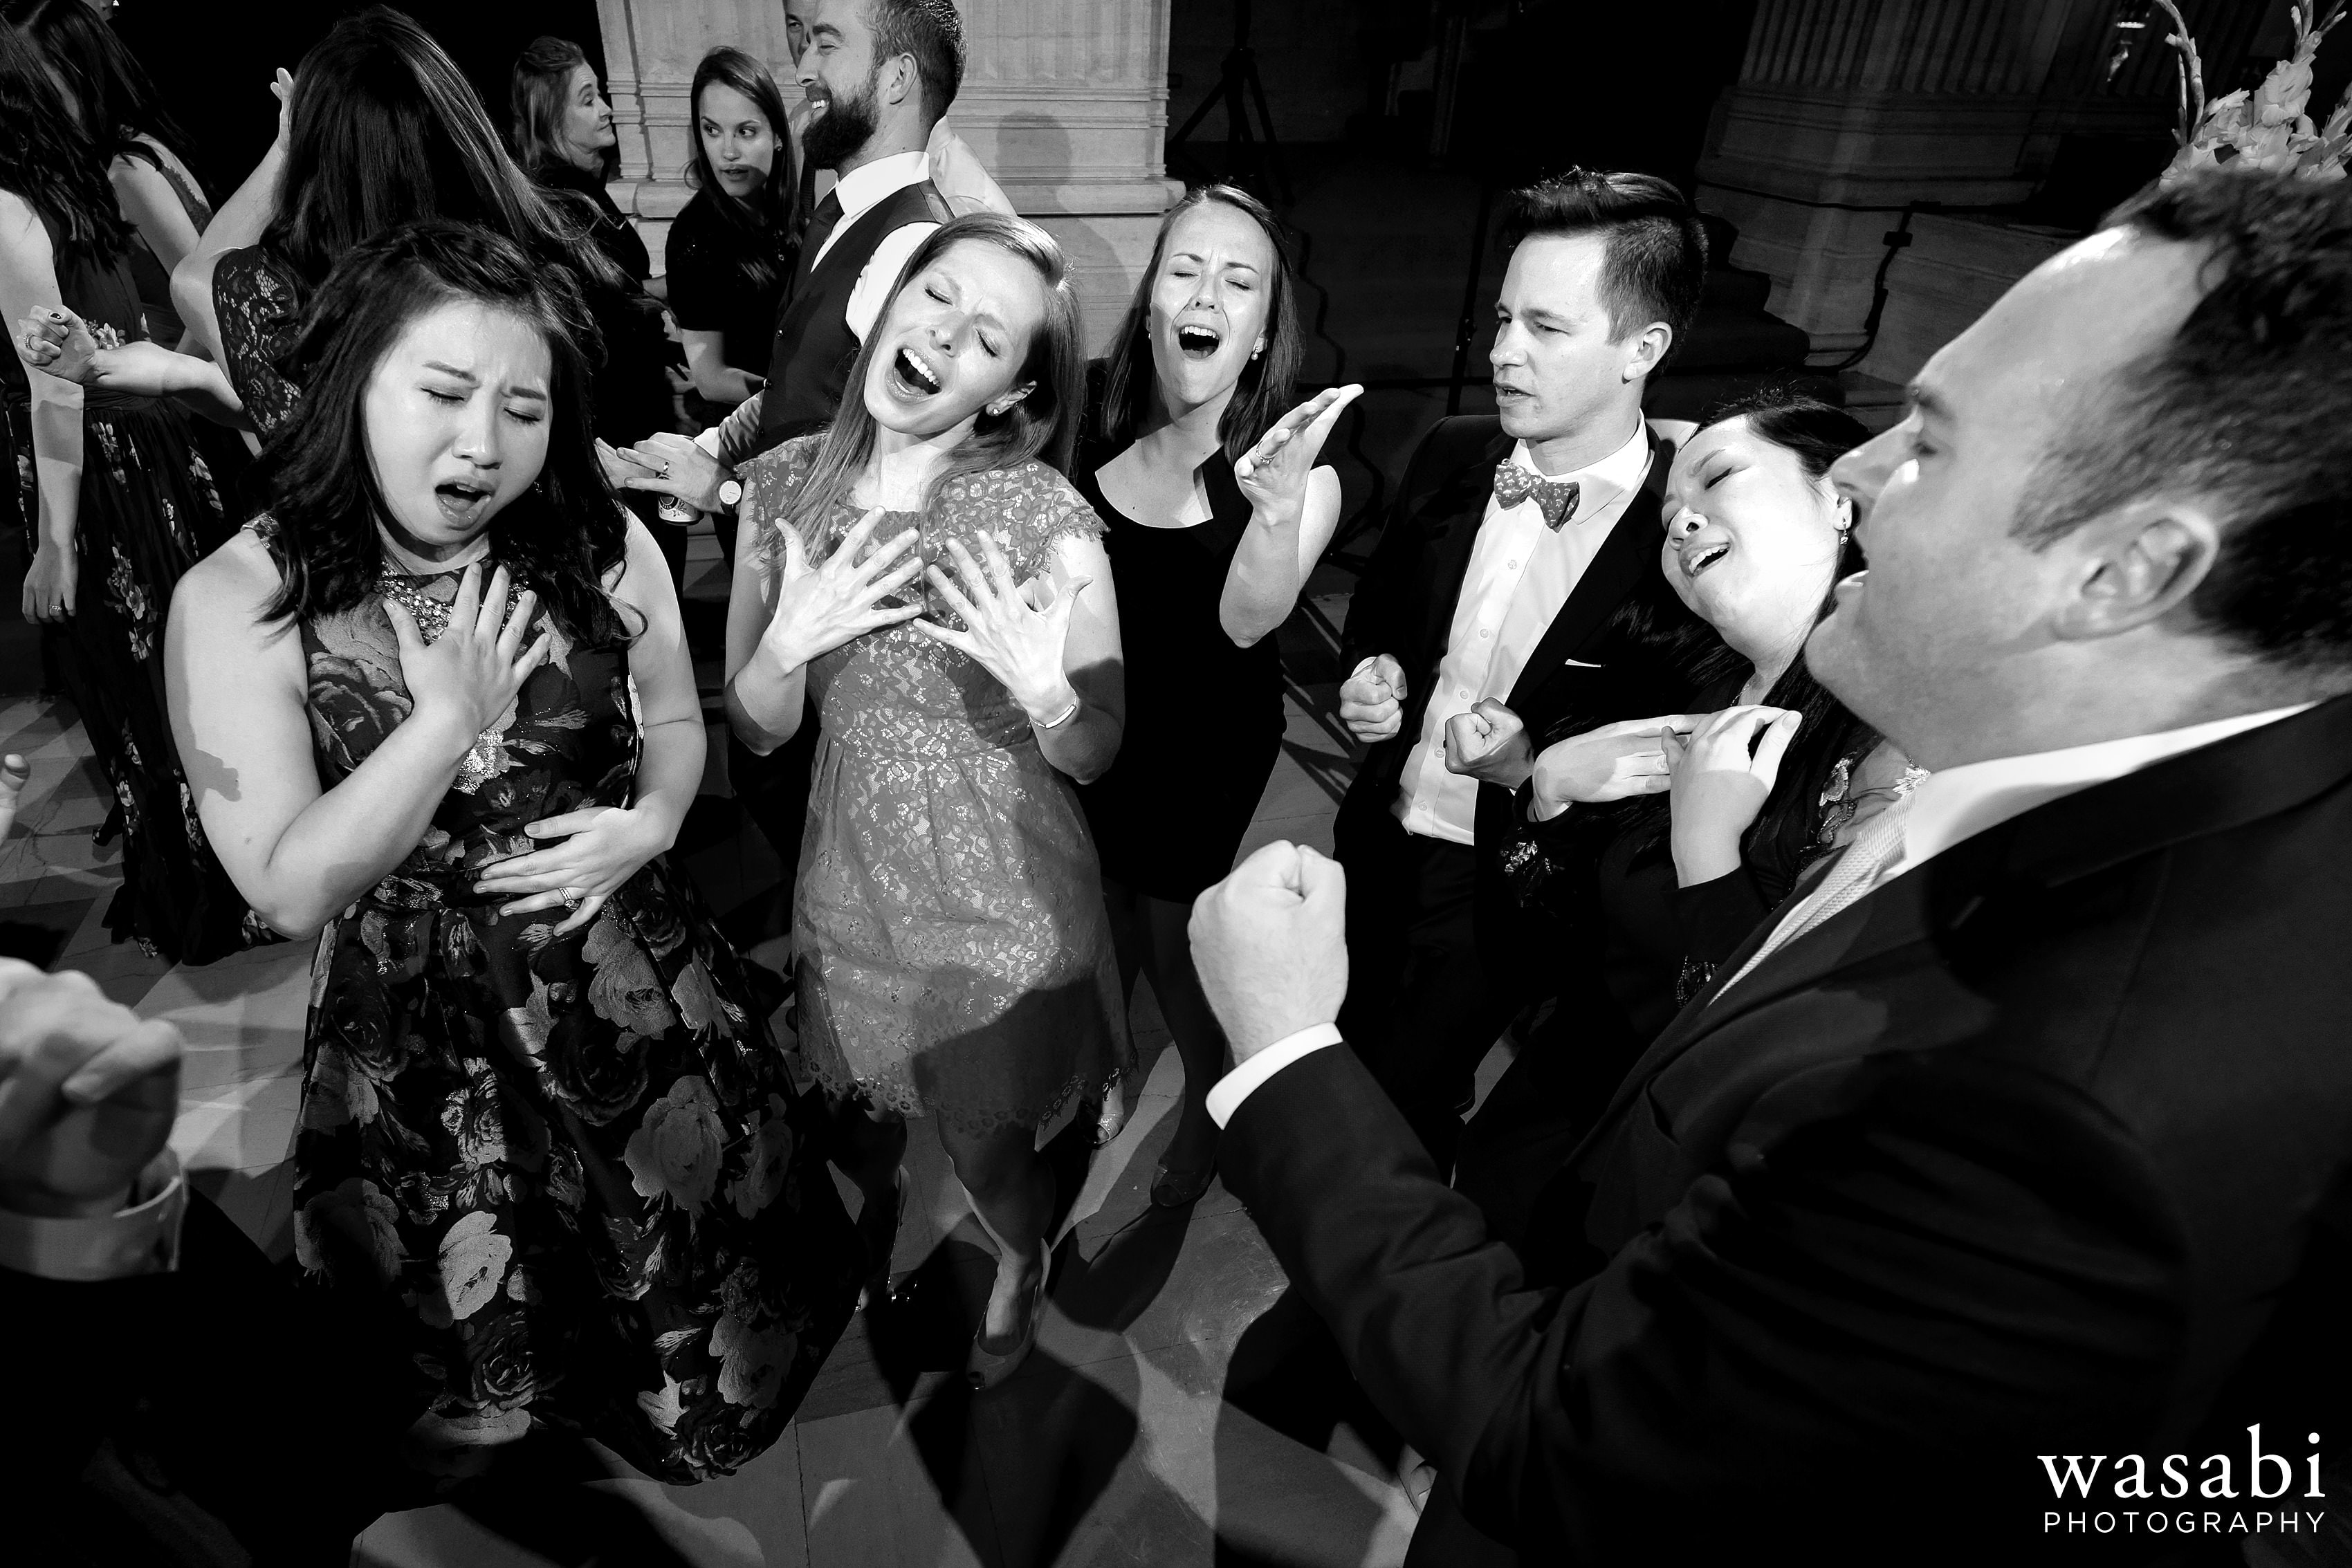 Guests dance during Civic Opera House wedding reception